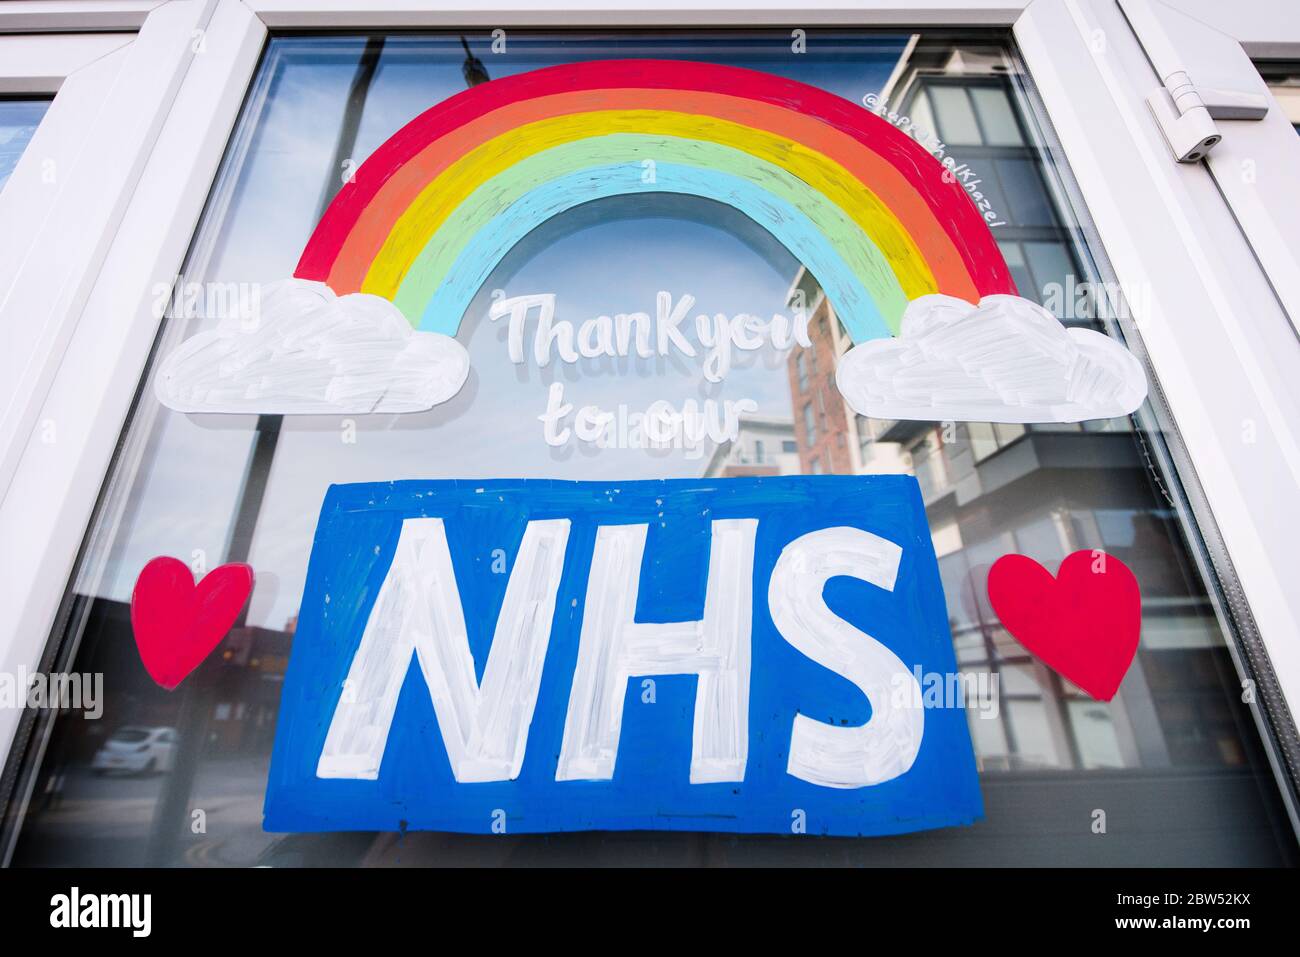 Newly painted window art, Thank you NHS and a rainbow have been painted on a shop front in Manchester to thank all the front line NHS staff. Stock Photo